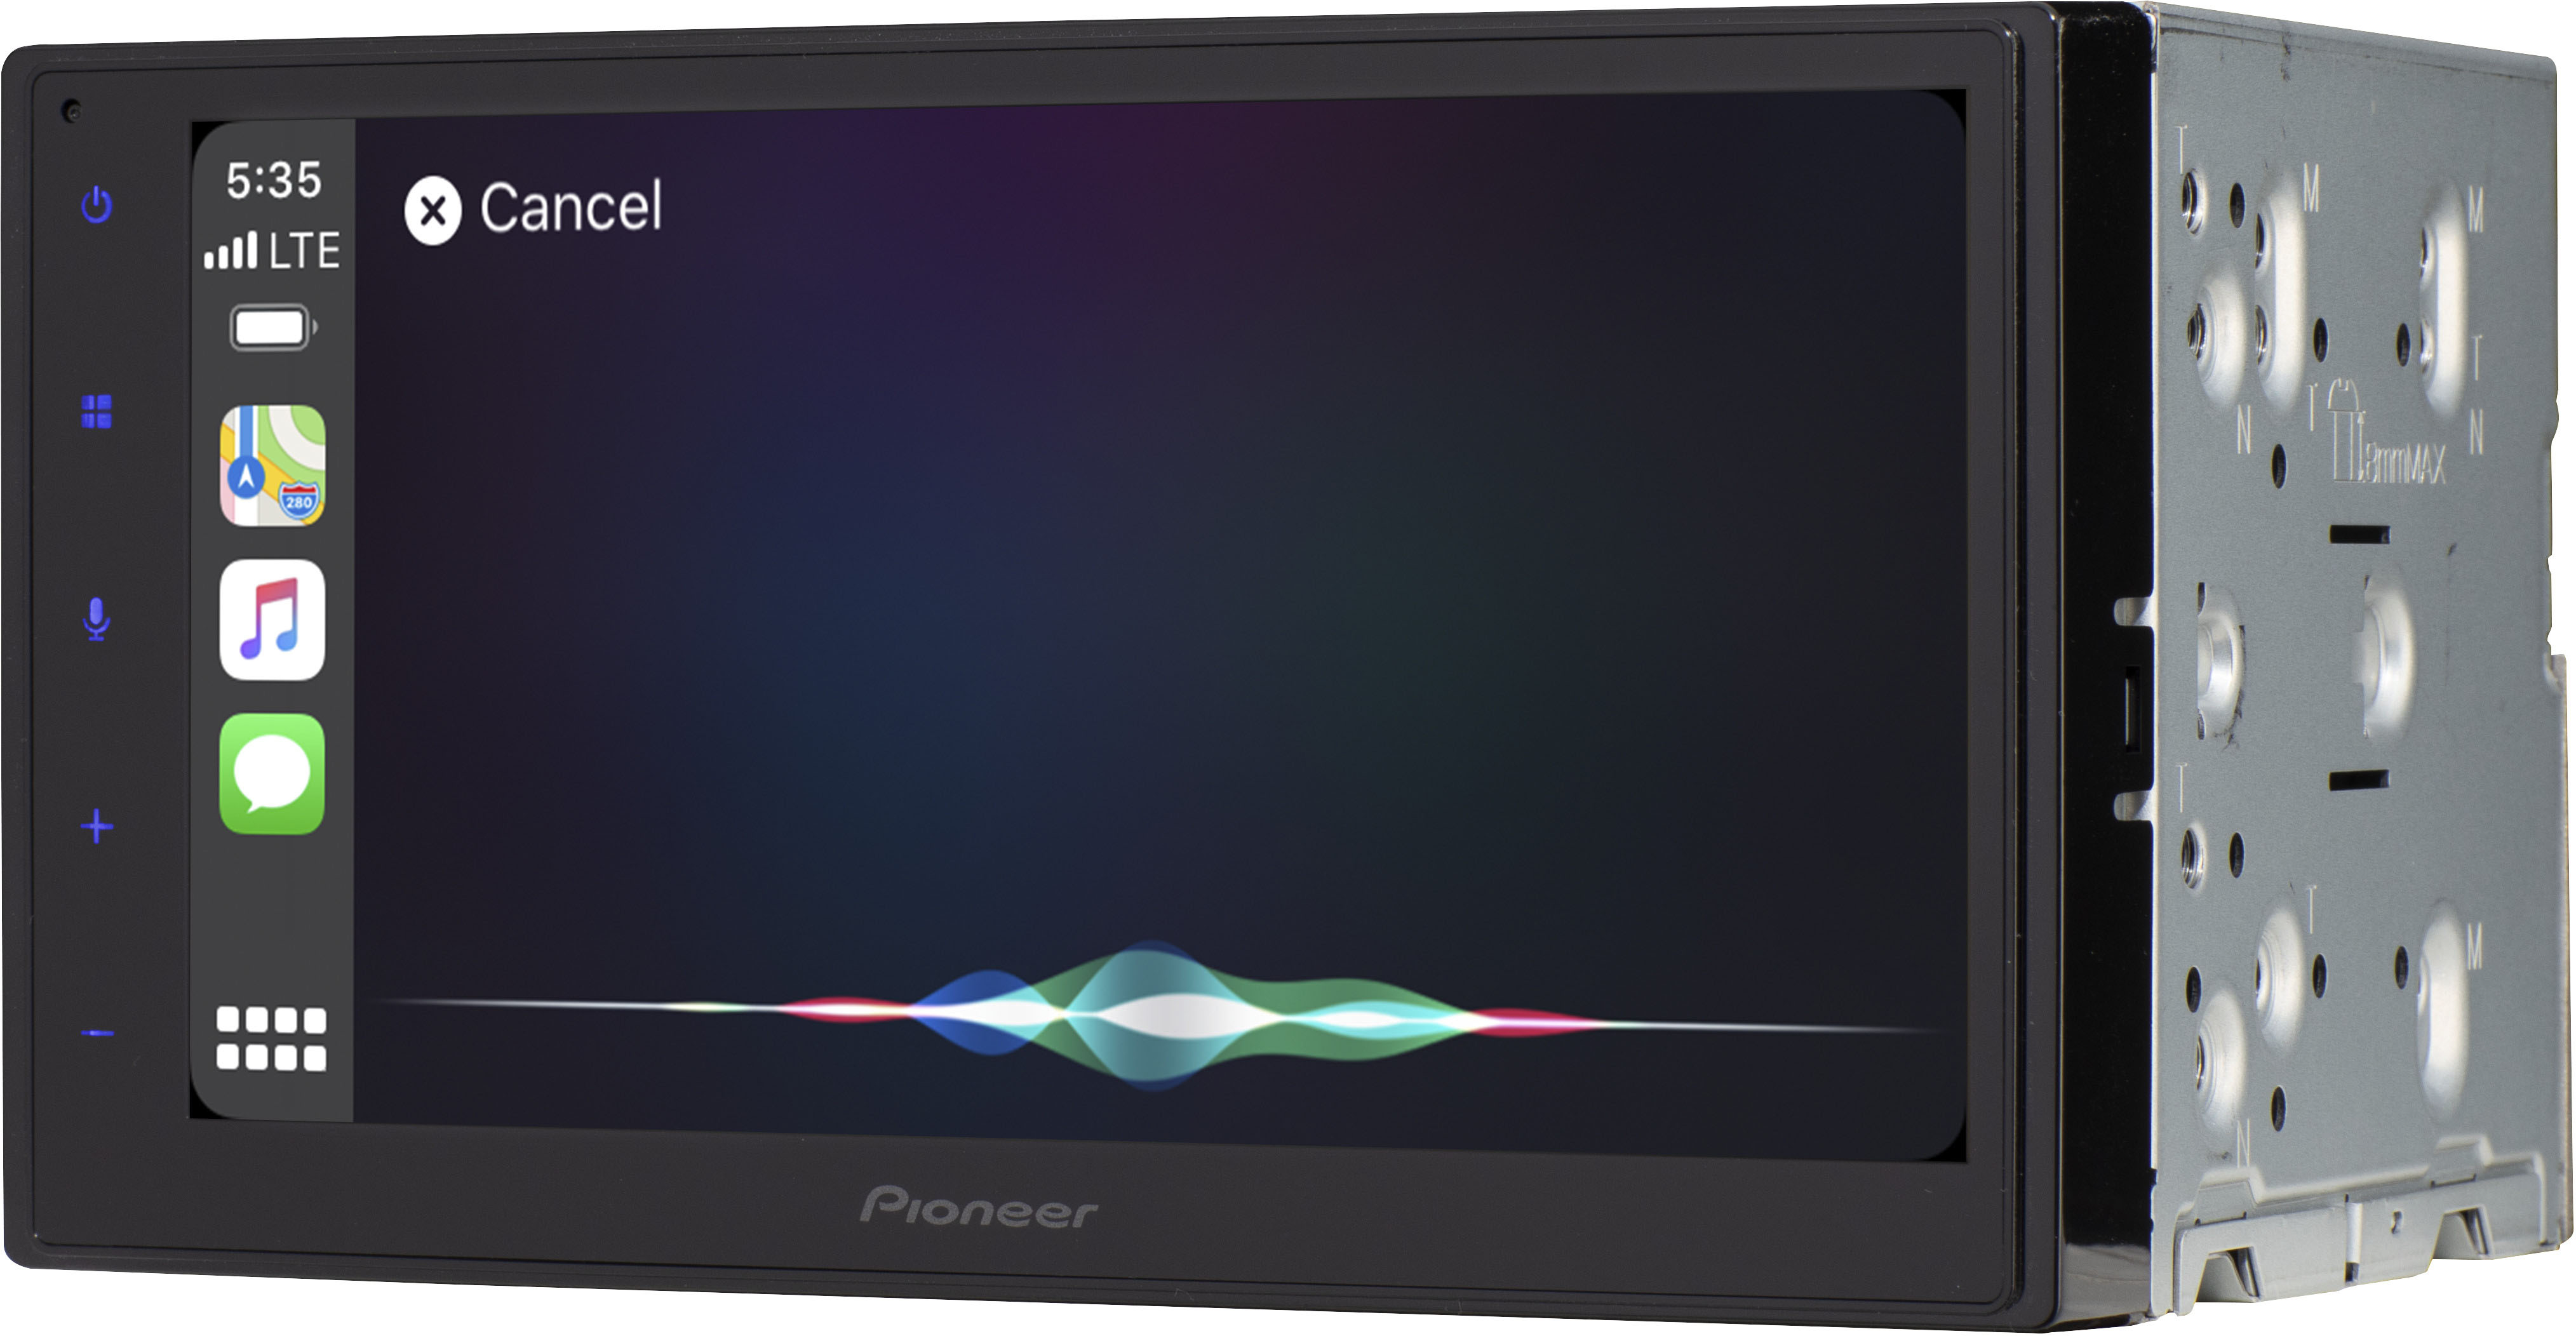 Pioneer's Latest Aftermarket In-Dash Systems With CarPlay Support Now  Available - MacRumors